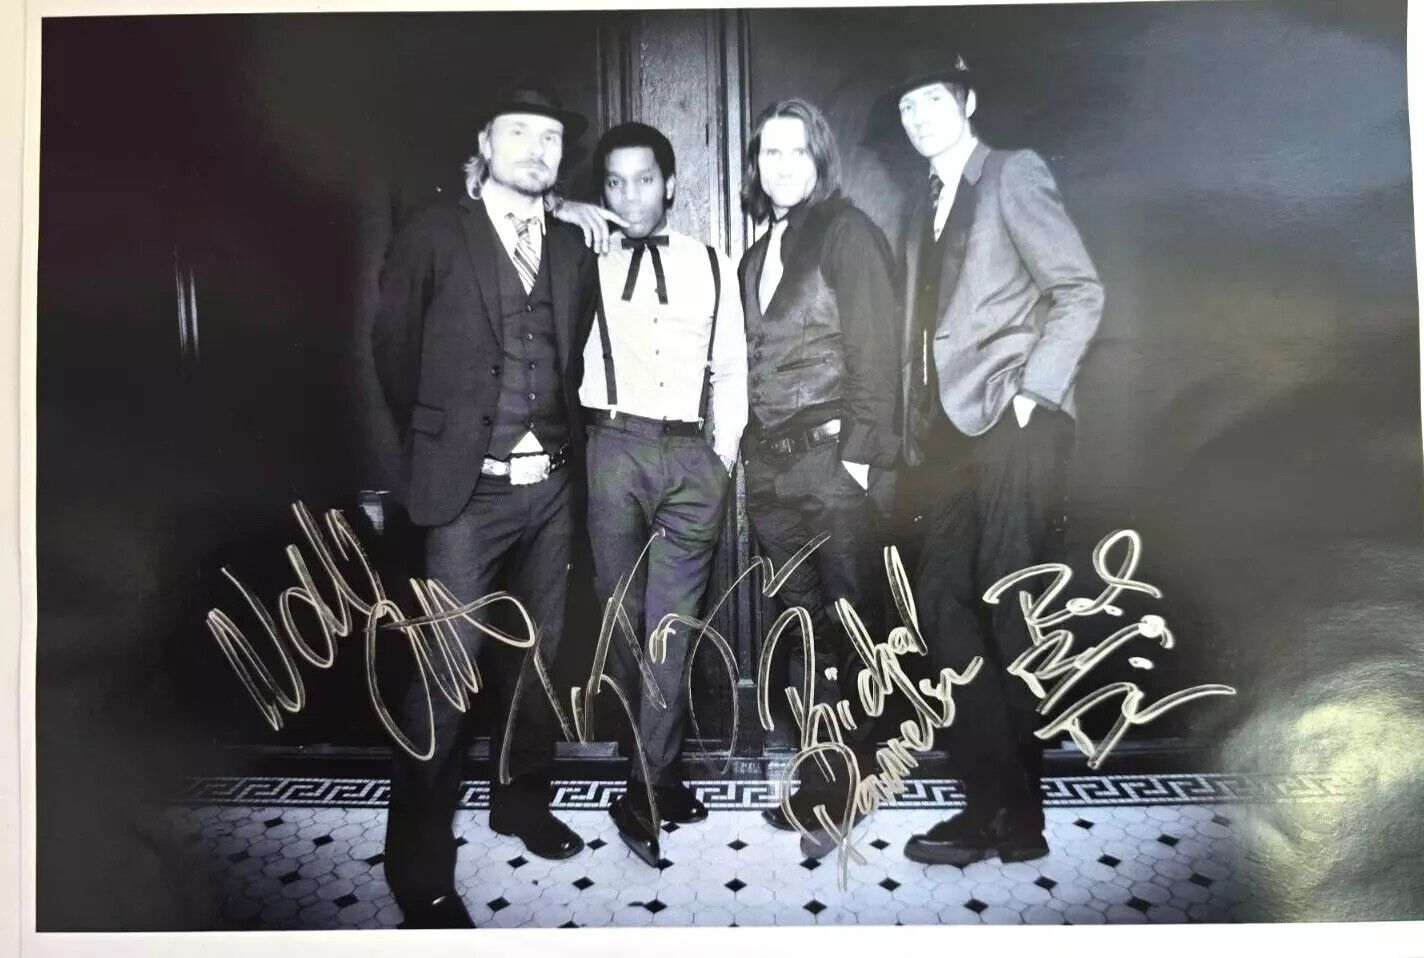 Vintage Trouble Hand Signed presentation A4 on glossy print by Band Members